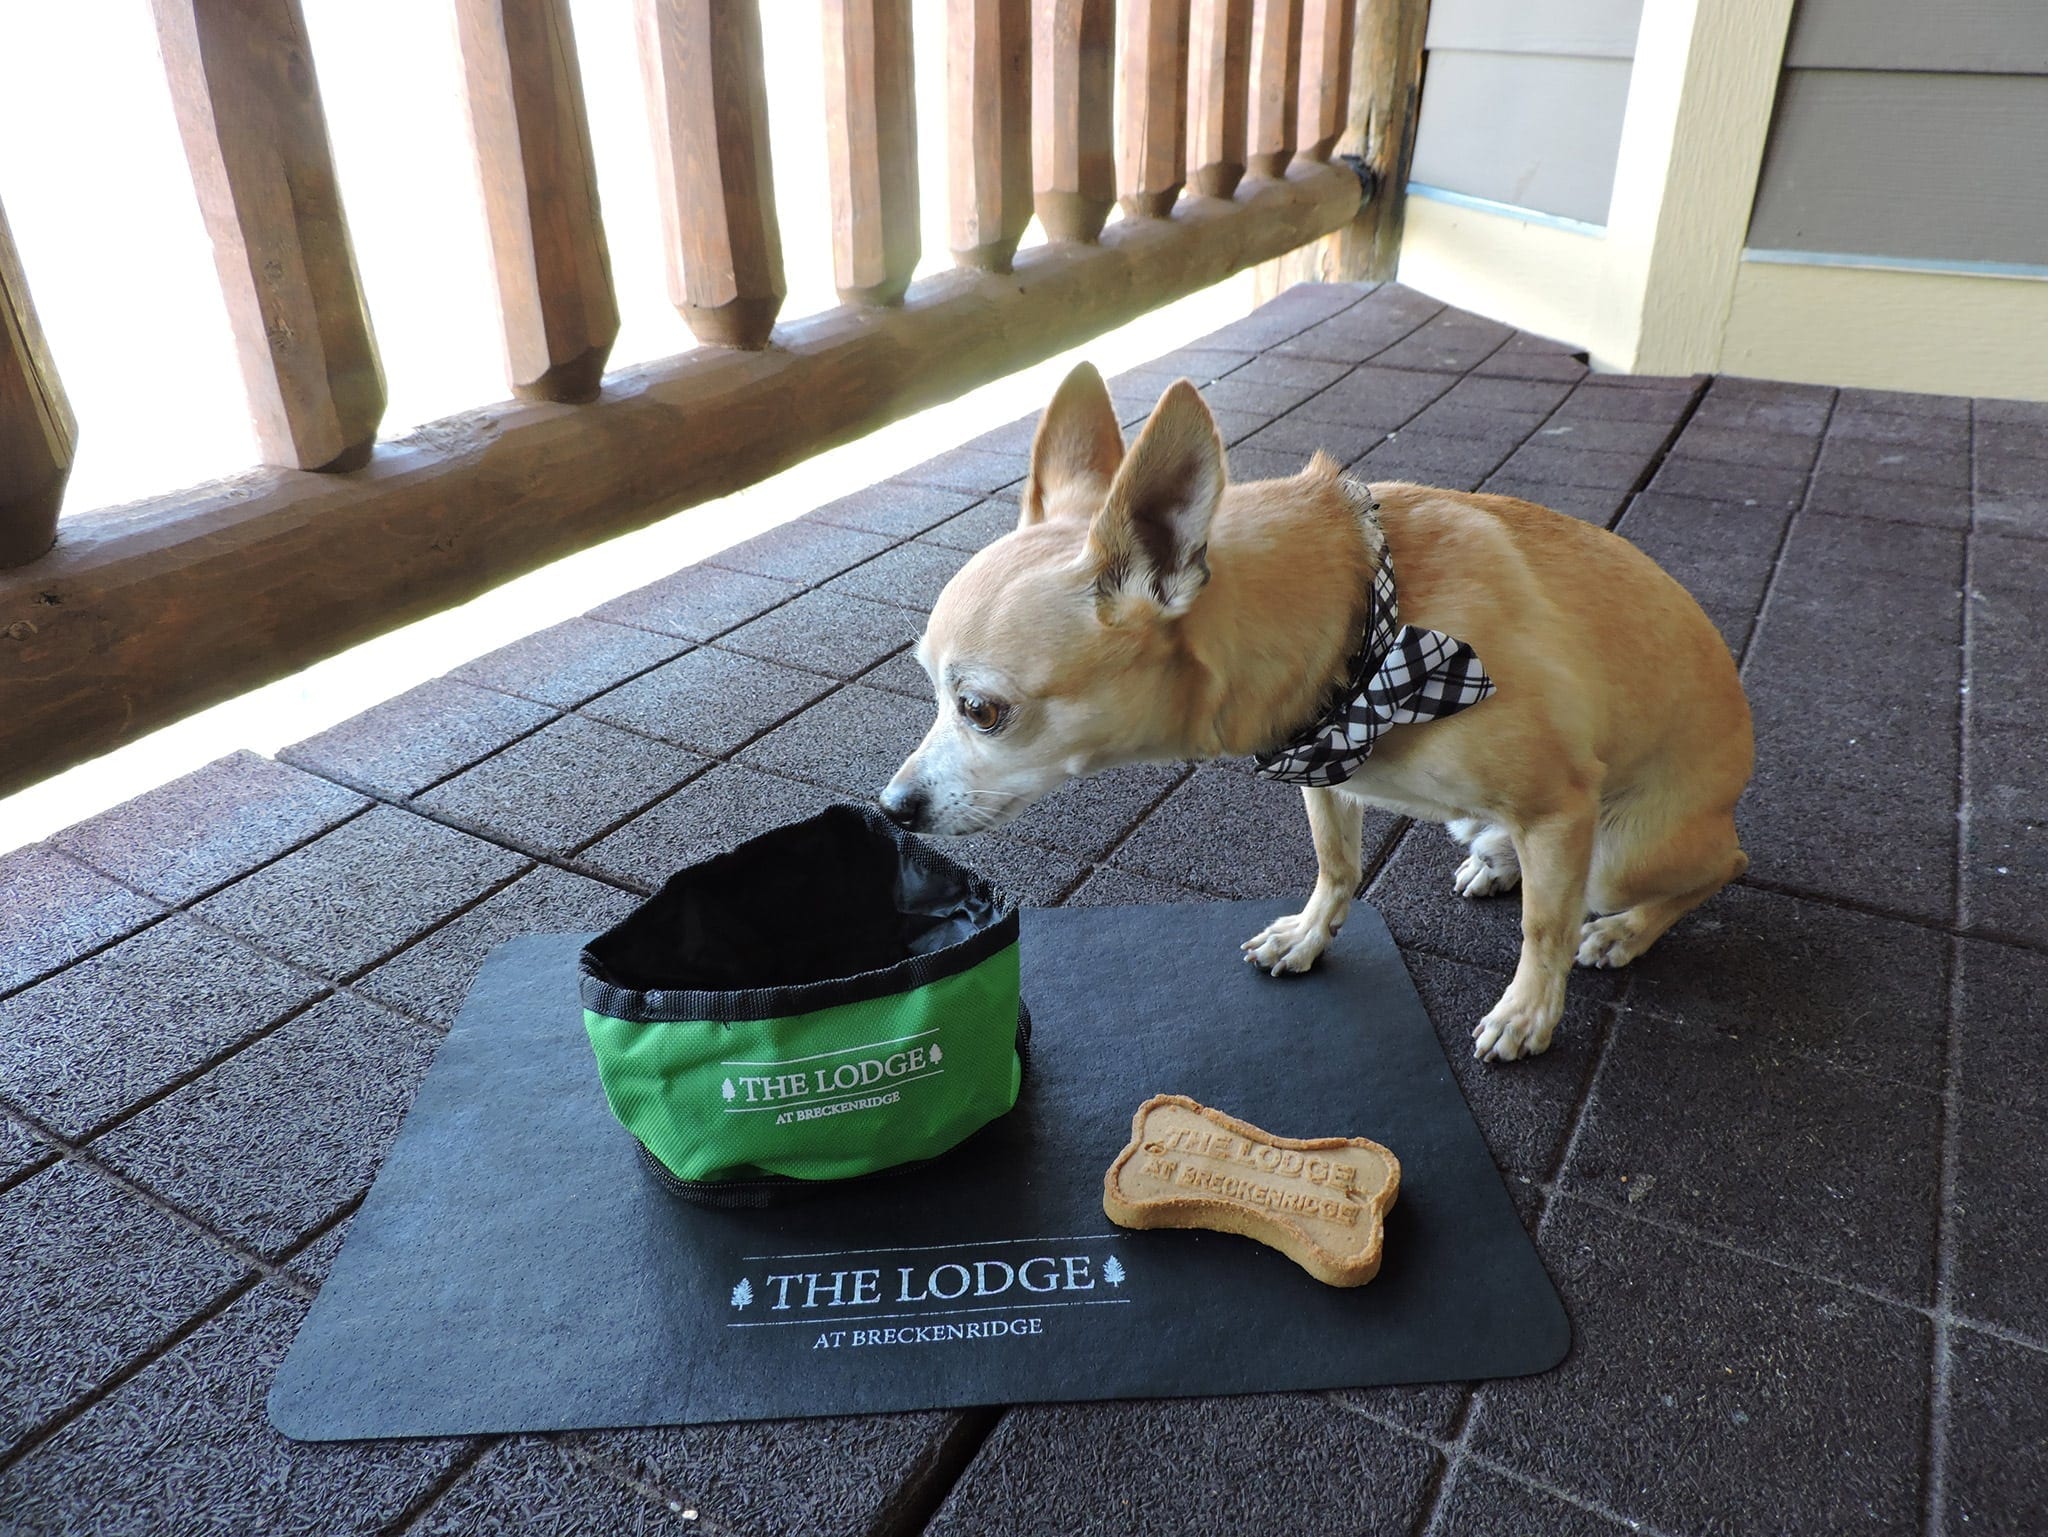 The Lodge at Breckenridge has one of the best dog packages of any lodging company.